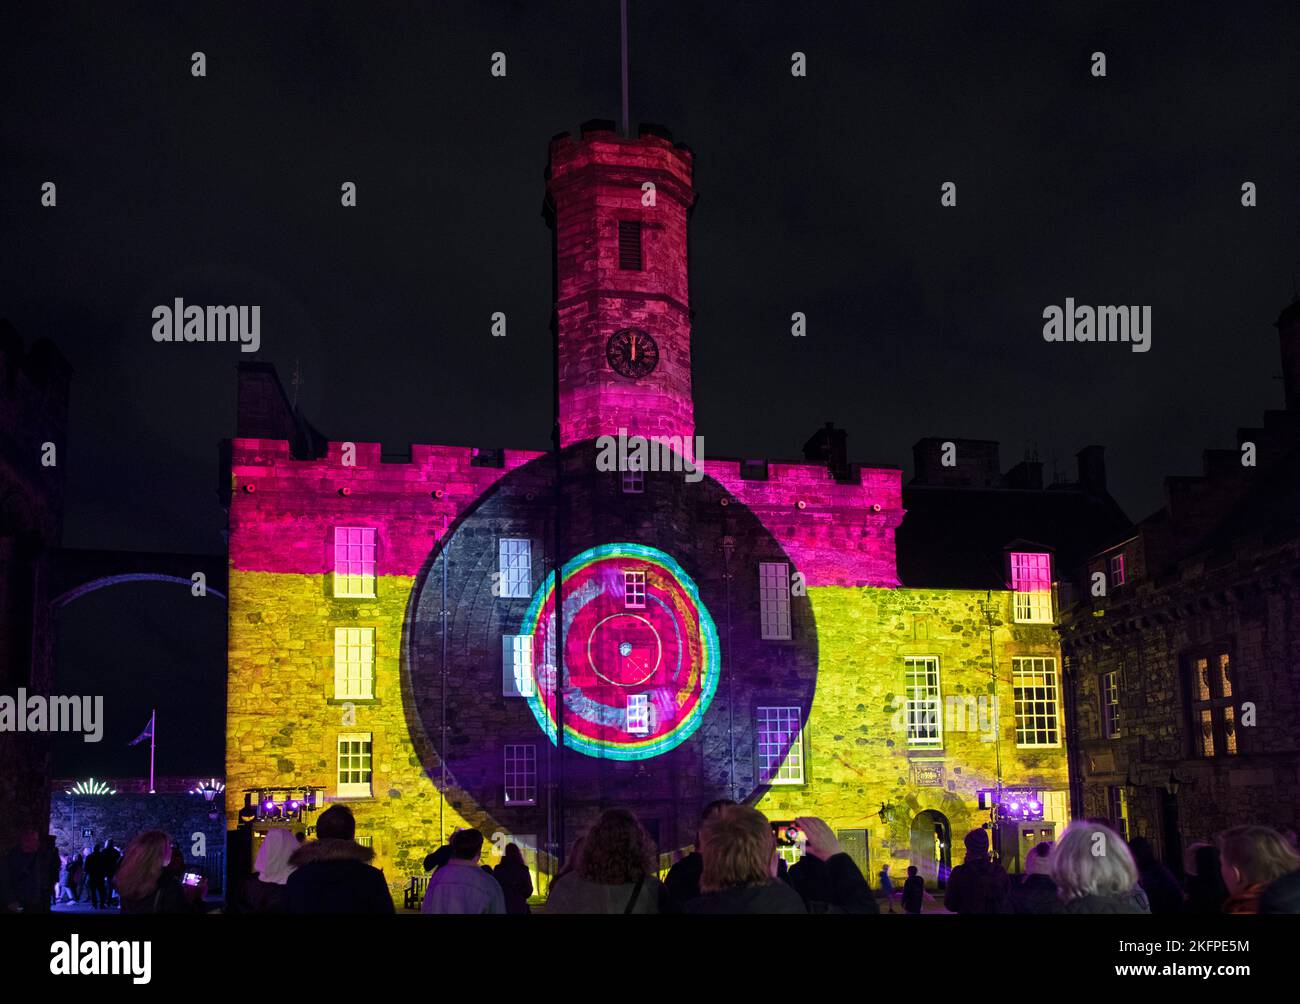 Edinburgh Castle, Edinburgh, Scotland, UK. 19 November 2022. Hundreds turned out on a cold Saturday to see the Castle of Light, Edinburgh's skyline sparkles and glistens in brilliant colour as the 2nd night of 'Kingdom of Colours' 2022 event kicks off with projections and illuminations on the castle's ancient walls. The preview event on Thursday had to be postponed due to a wet weather yellow warning for the area. Various themes ran throughout including The Beatles Yellow Submarine and other sixties tunes as well as Scottish History. Credit: Arch White/alamy live news. Stock Photo